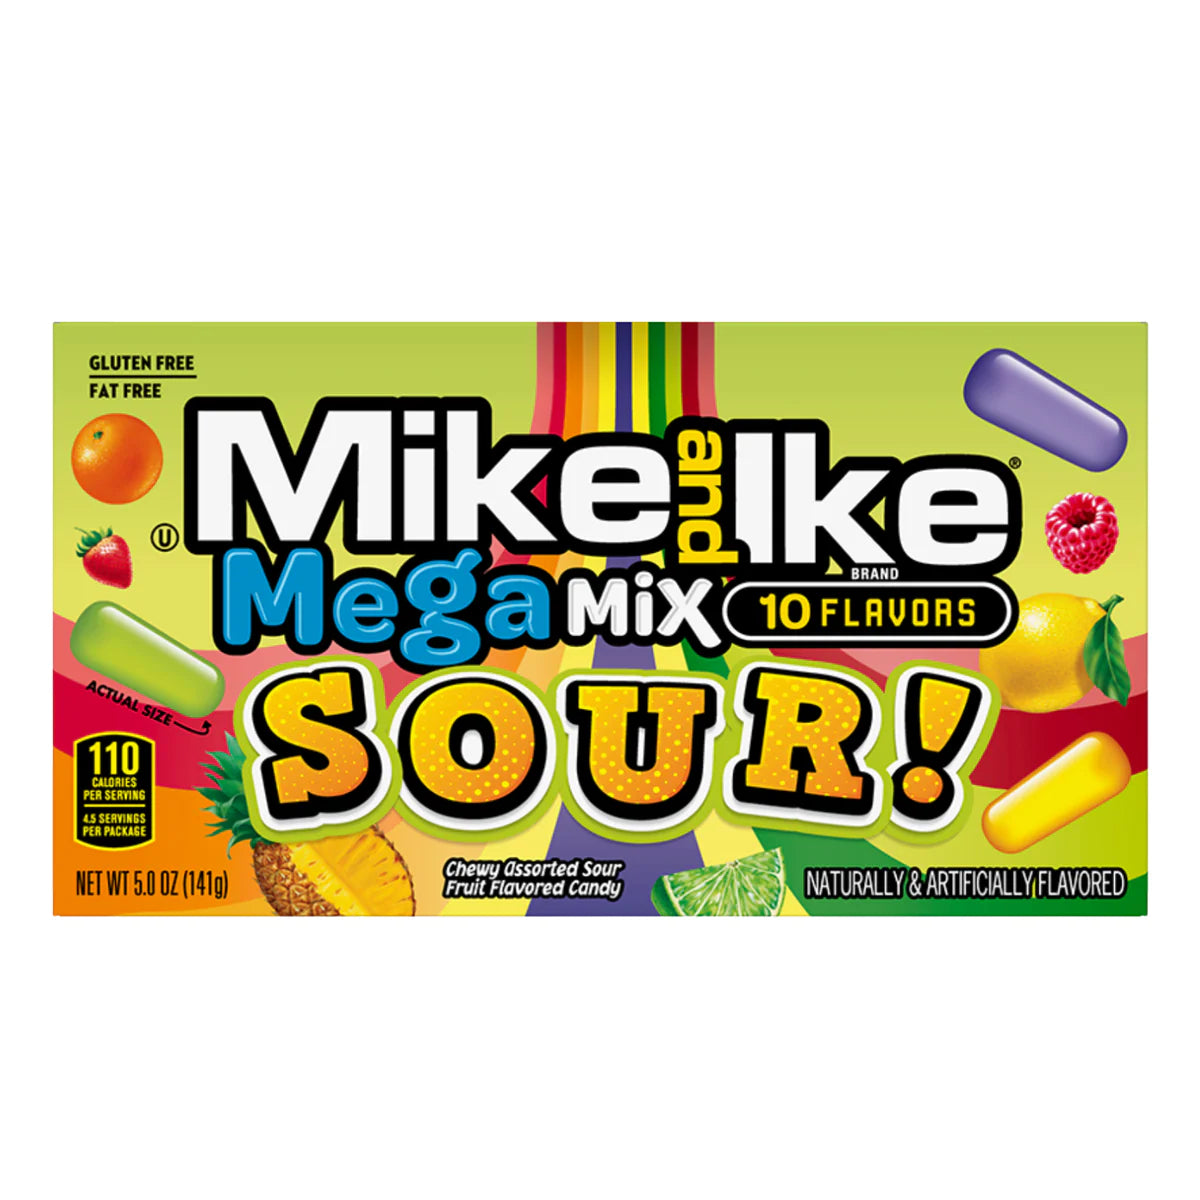 Mike and Ike mega mix sour